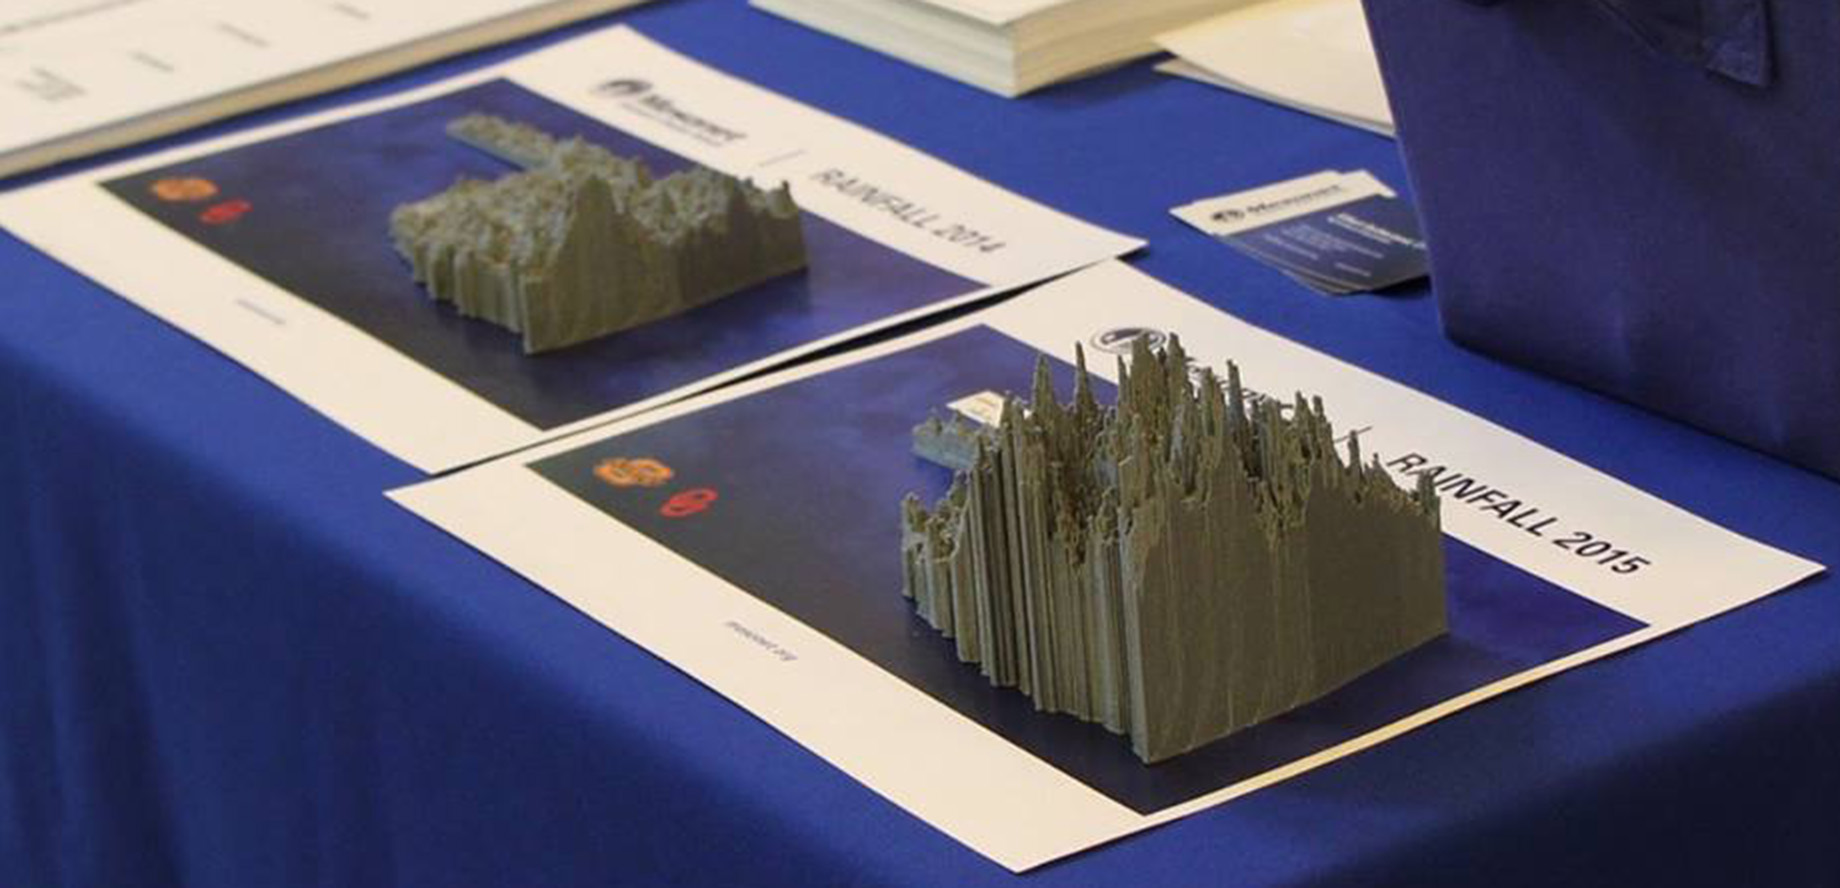 Two gray, 3-d printed models of rainfall sitting on a blue tablecloth at a public exhibit hall.